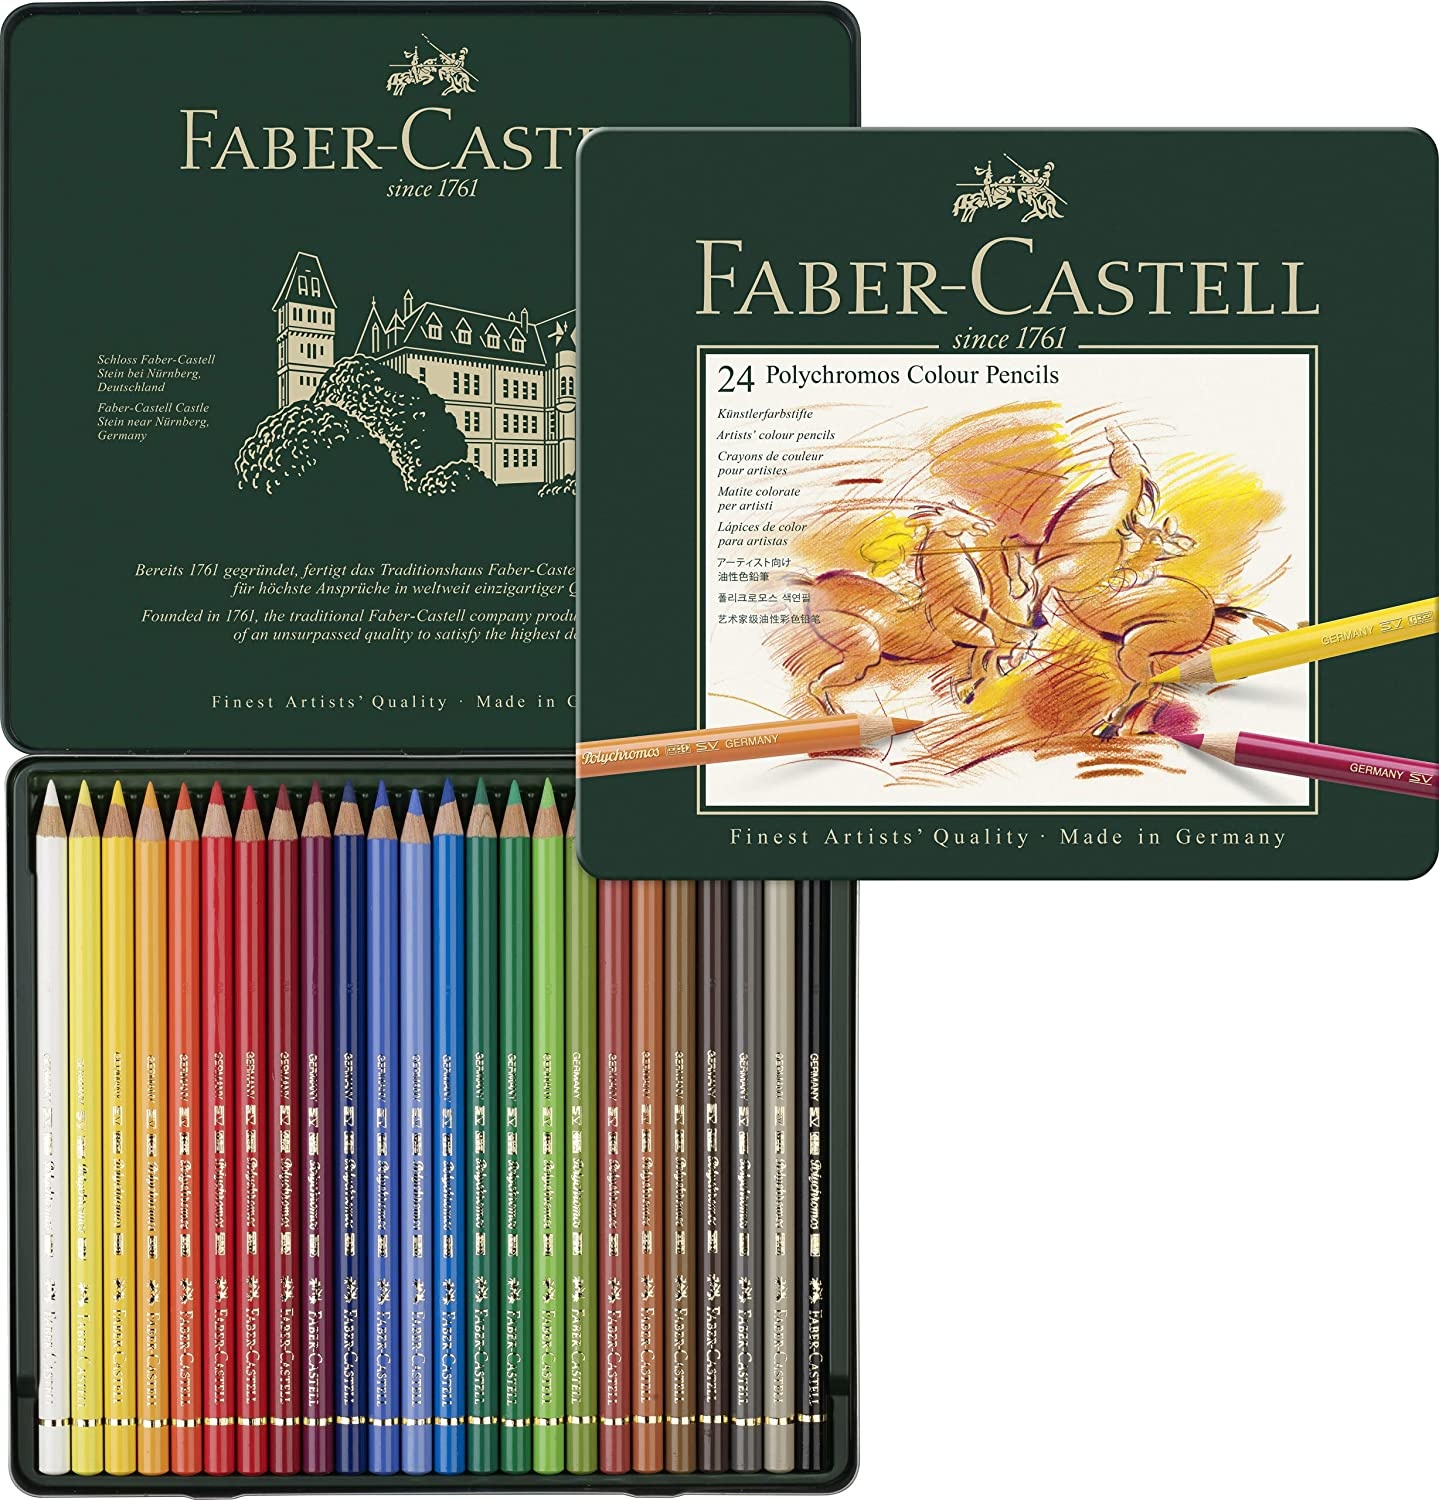 Sparkle color pencil roll from Faber-Castell